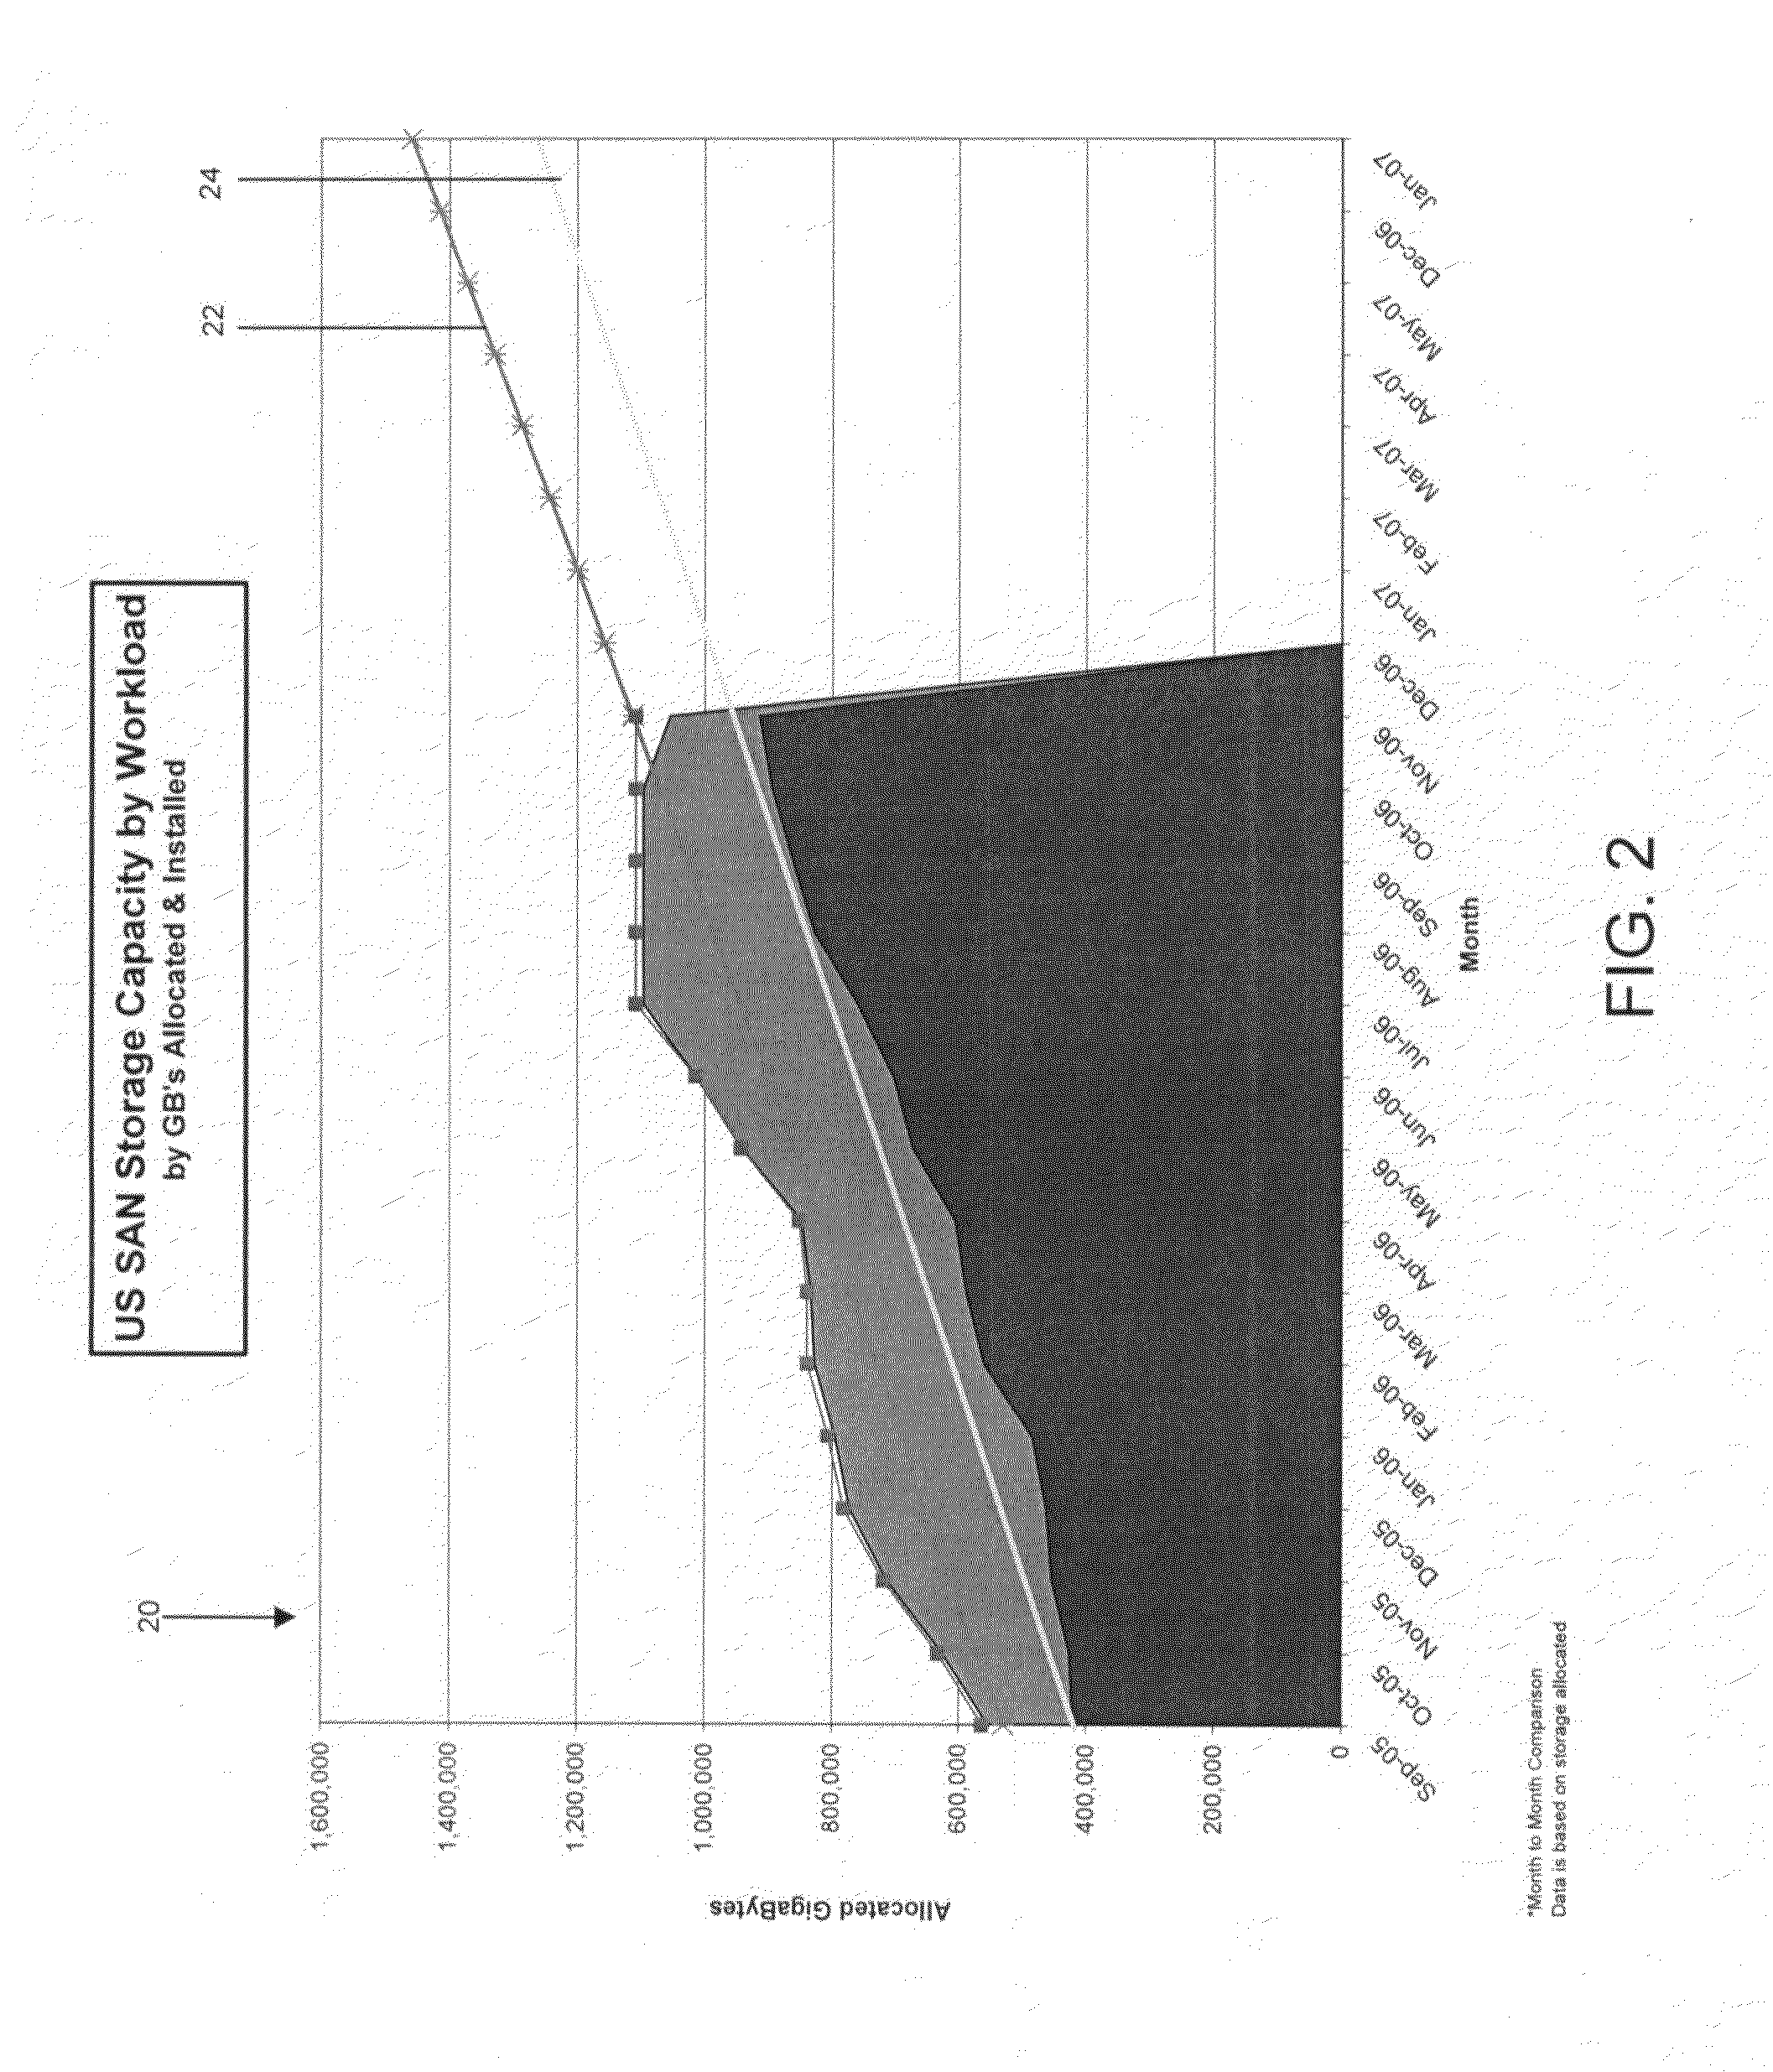 Storage area network (SAN) forecasting in a heterogeneous environment